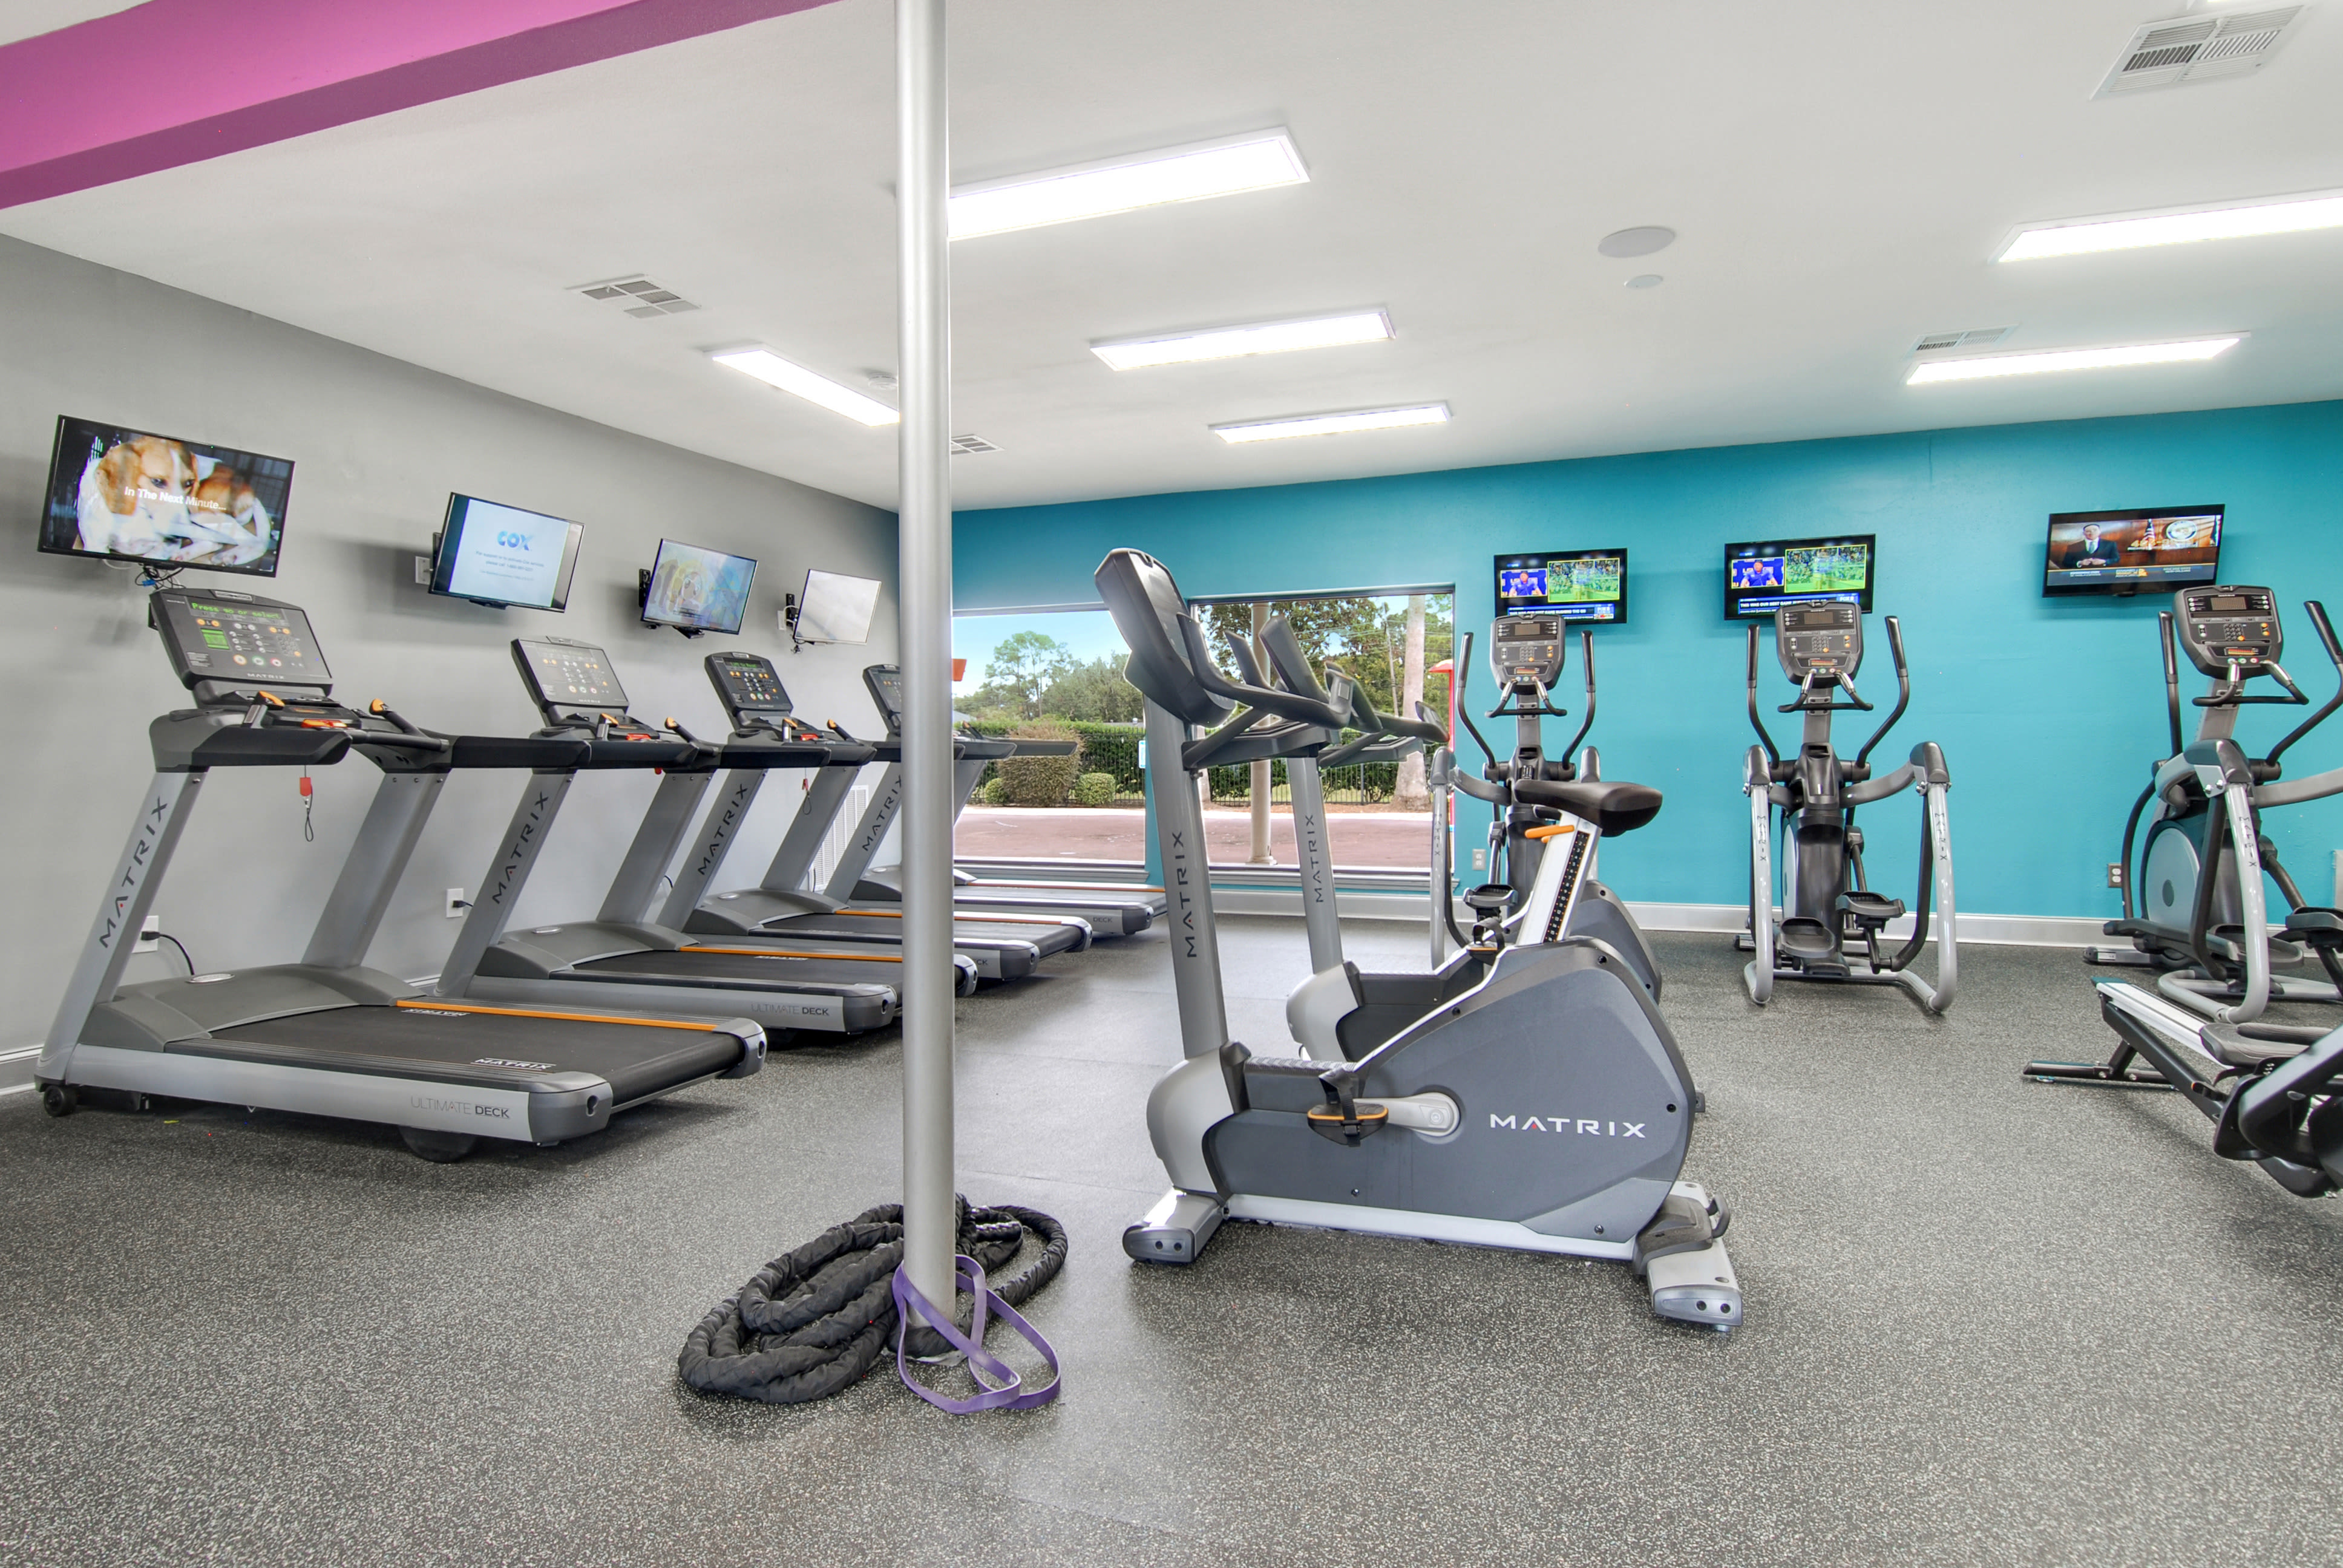 Corporate Units workout facility at O'Brien Realty Group in Avon CT